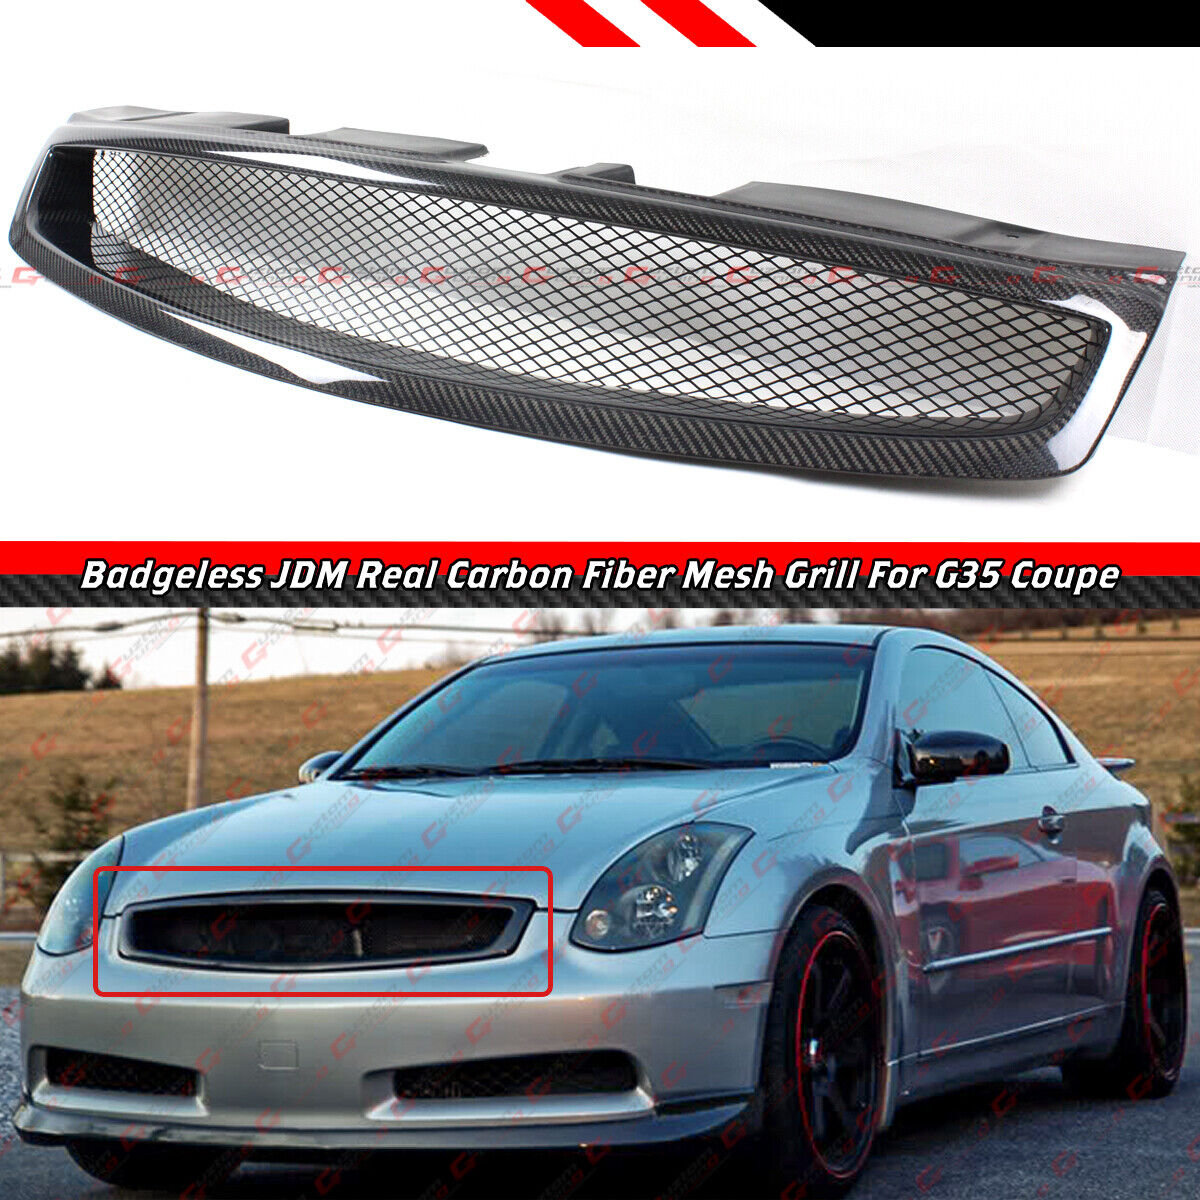 FOR 2003-07 INFINITI G35 2DR COUPE V35 REAL CARBON FIBER FRONT MESH GRILL GRILLE